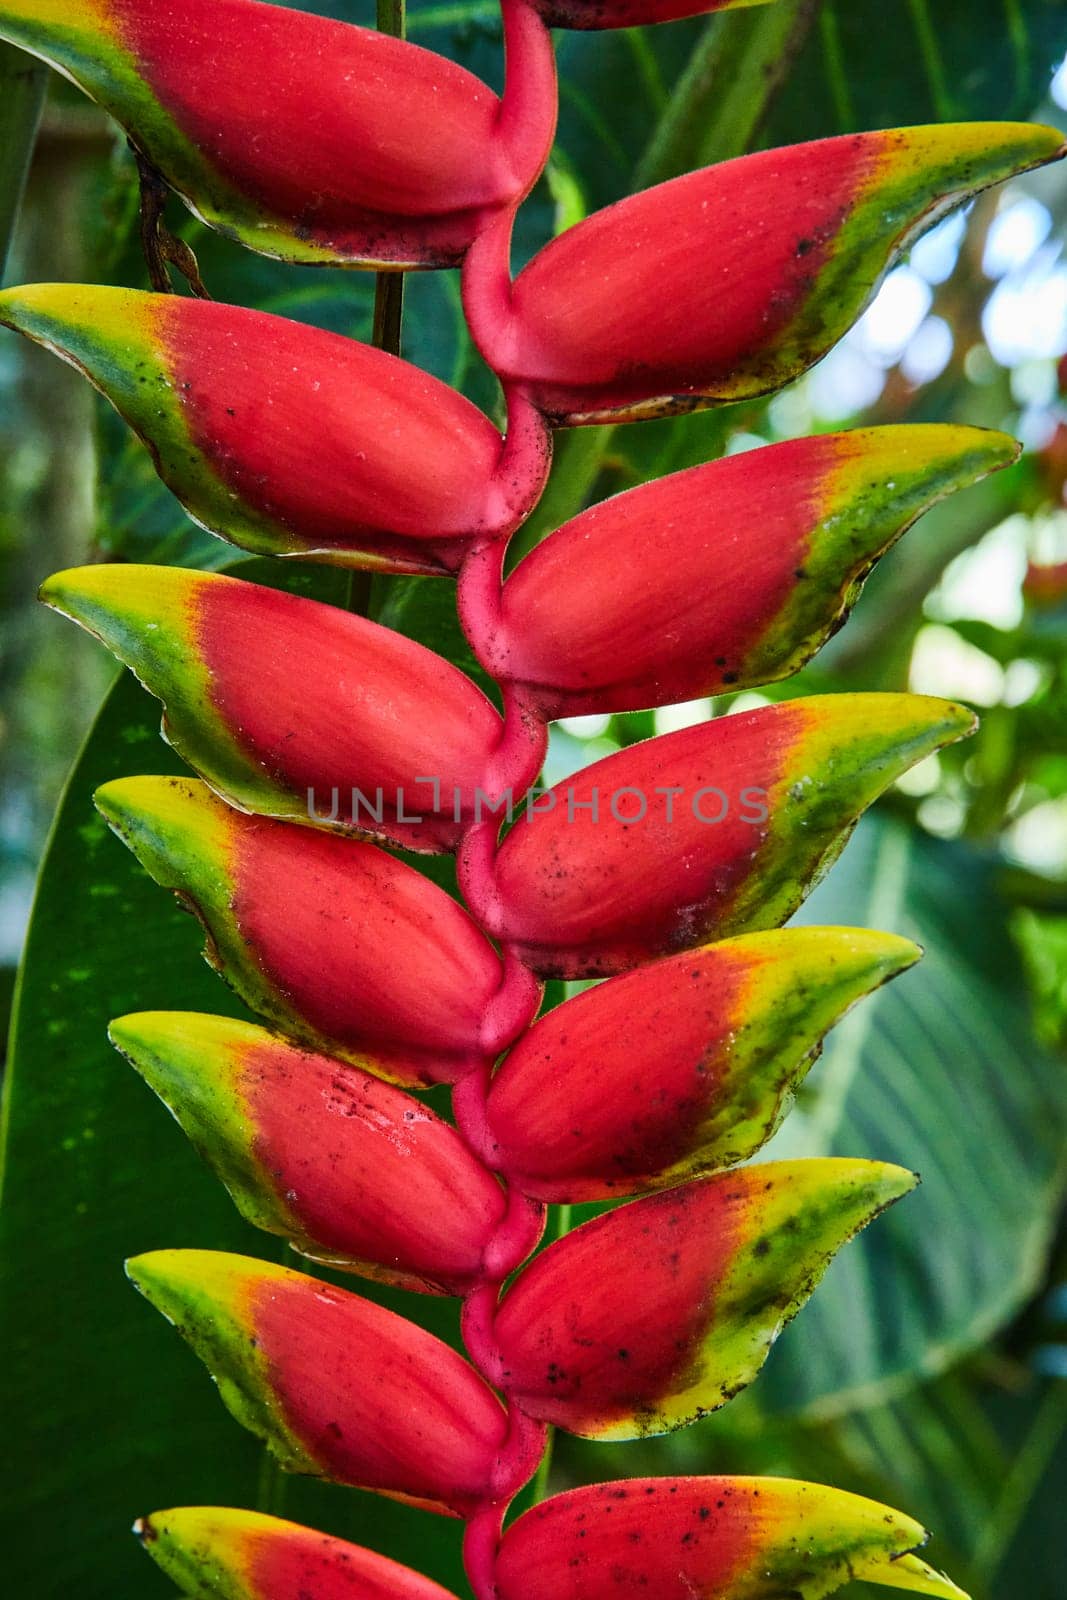 Vibrant close-up of a hanging heliconia flower in a greenhouse in Muncie, Indiana, depicting exotic beauty and tropical biodiversity.